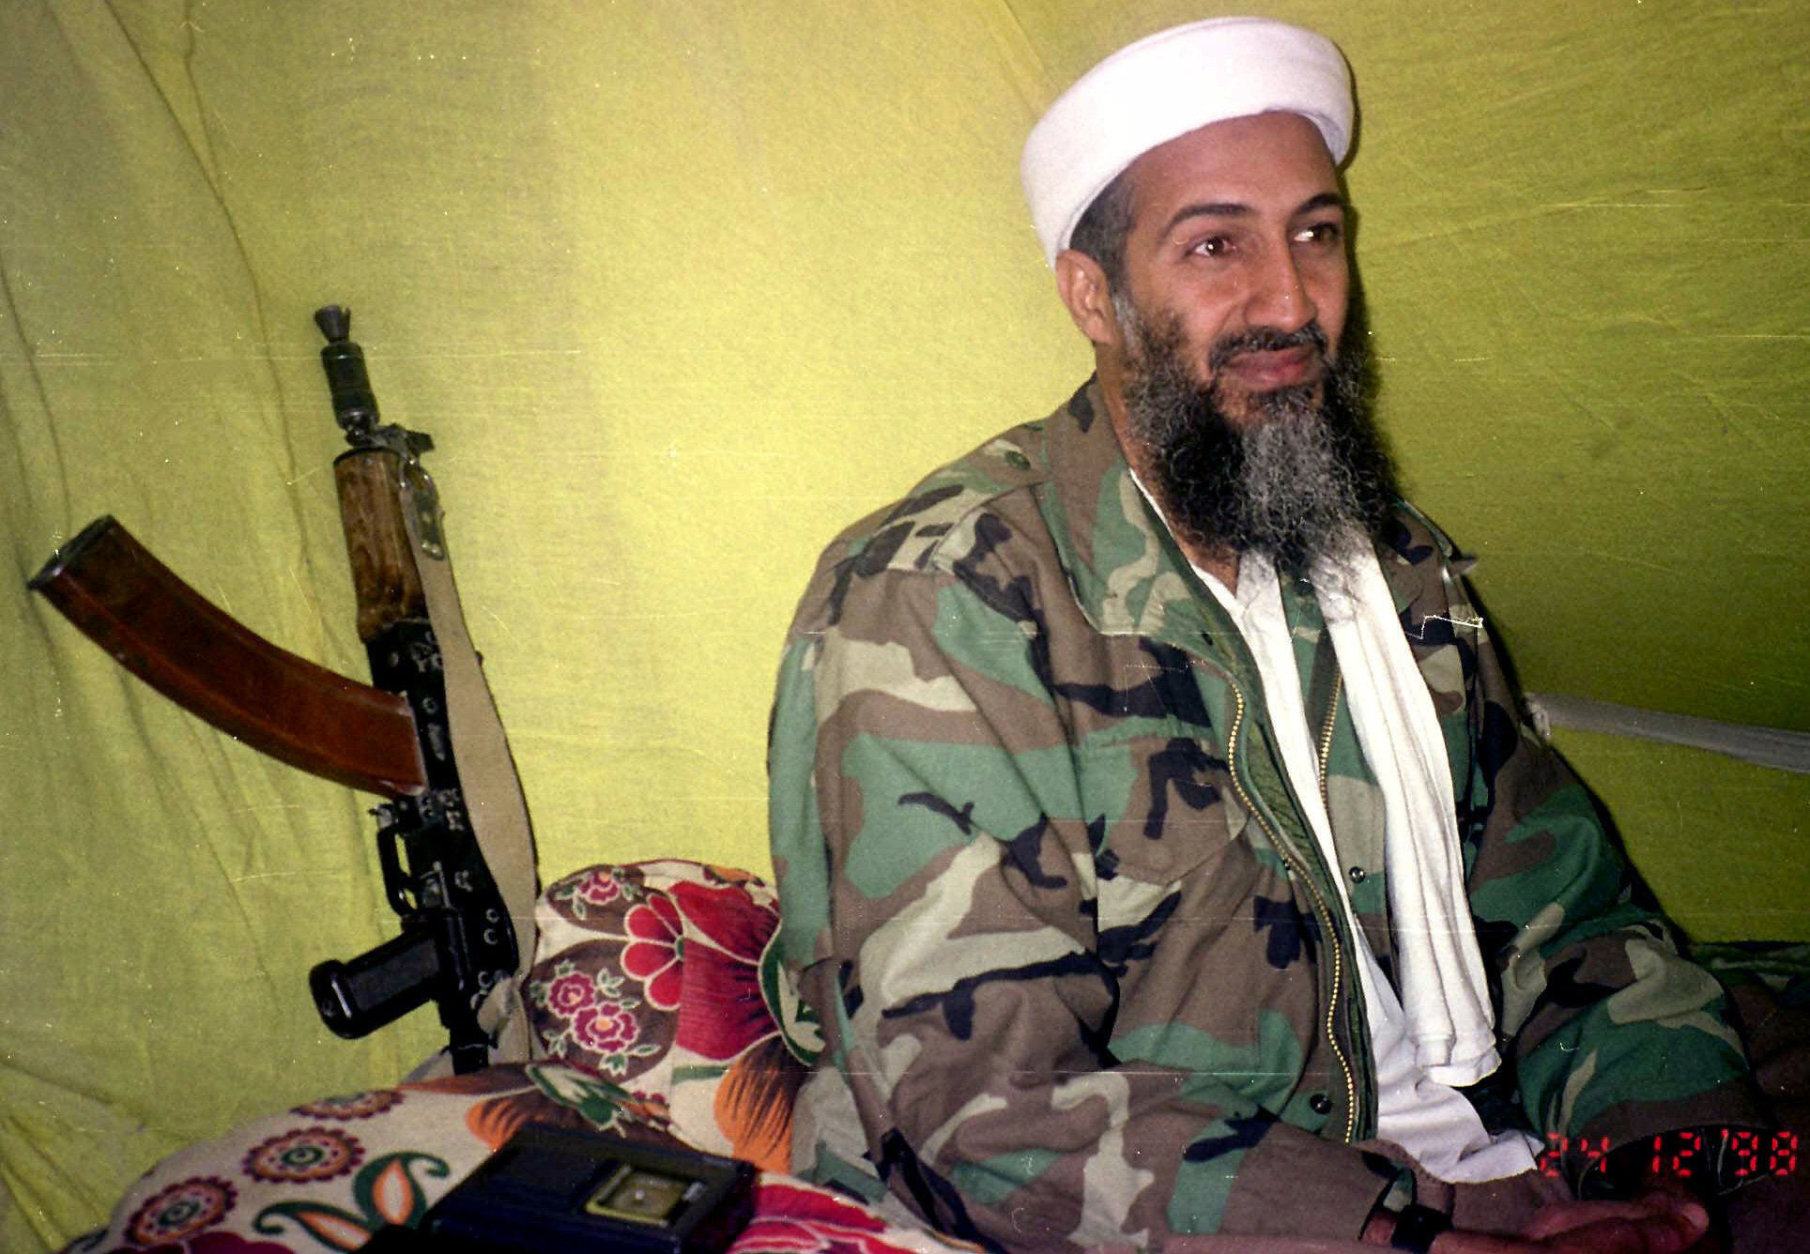 FILE - In this Dec. 24, 1998 file photo, Muslim militant and al-Qaida leader Osama Bin Laden speaks to a selected group of reporters in mountains of Helmand province in southern Afghanistan. The Americans who raided bin Laden's lair met far less resistance than the Obama administration described in the aftermath, according to its latest account. The commandos encountered gunshots from only one man, whom they quickly killed, before sweeping the house and shooting others, who were unarmed, a senior defense official said. (AP Photo/Rahimullah Yousafzai, File)